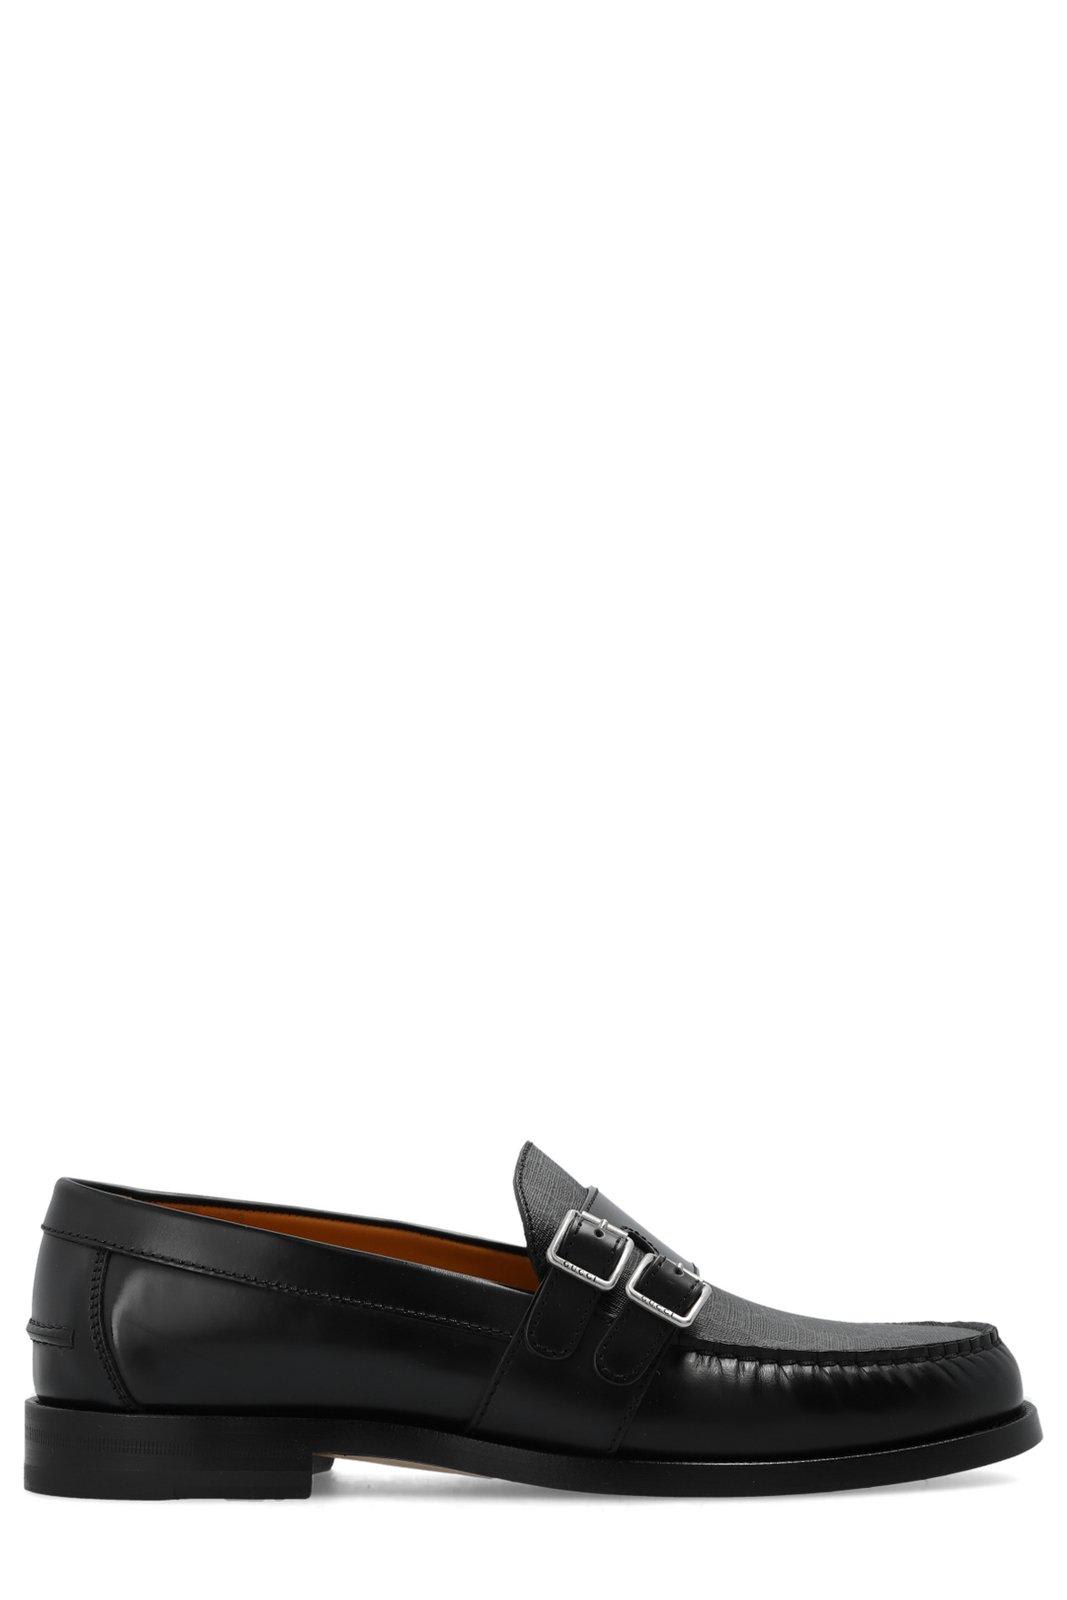 Gucci Buckle Detailed Loafers